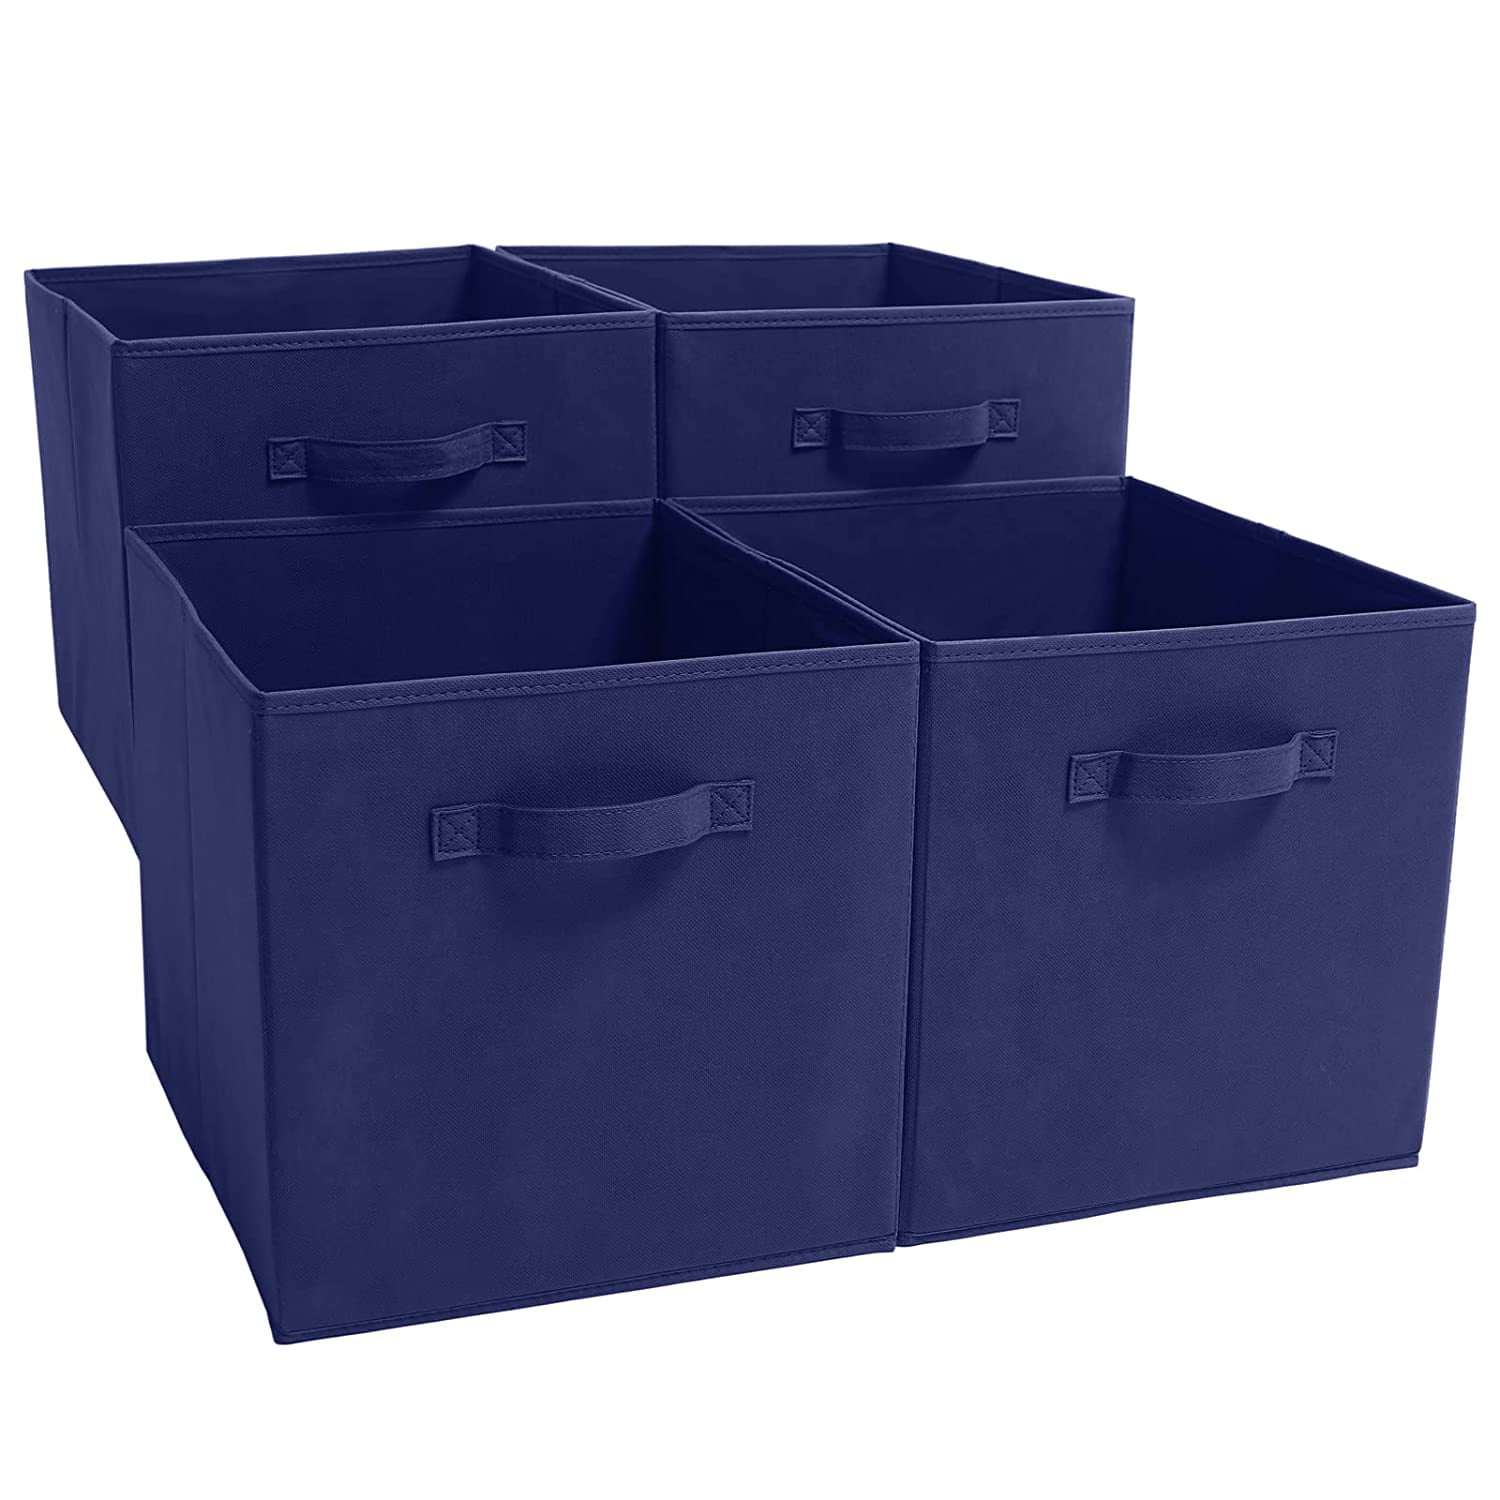 Juvale 3 Pack Collapsible Fabric Storage Bins, Cubes & Organizer with  Handles, Shelf Baskets & Boxes for Organization, Navy Blue, 16.25 x 12 in